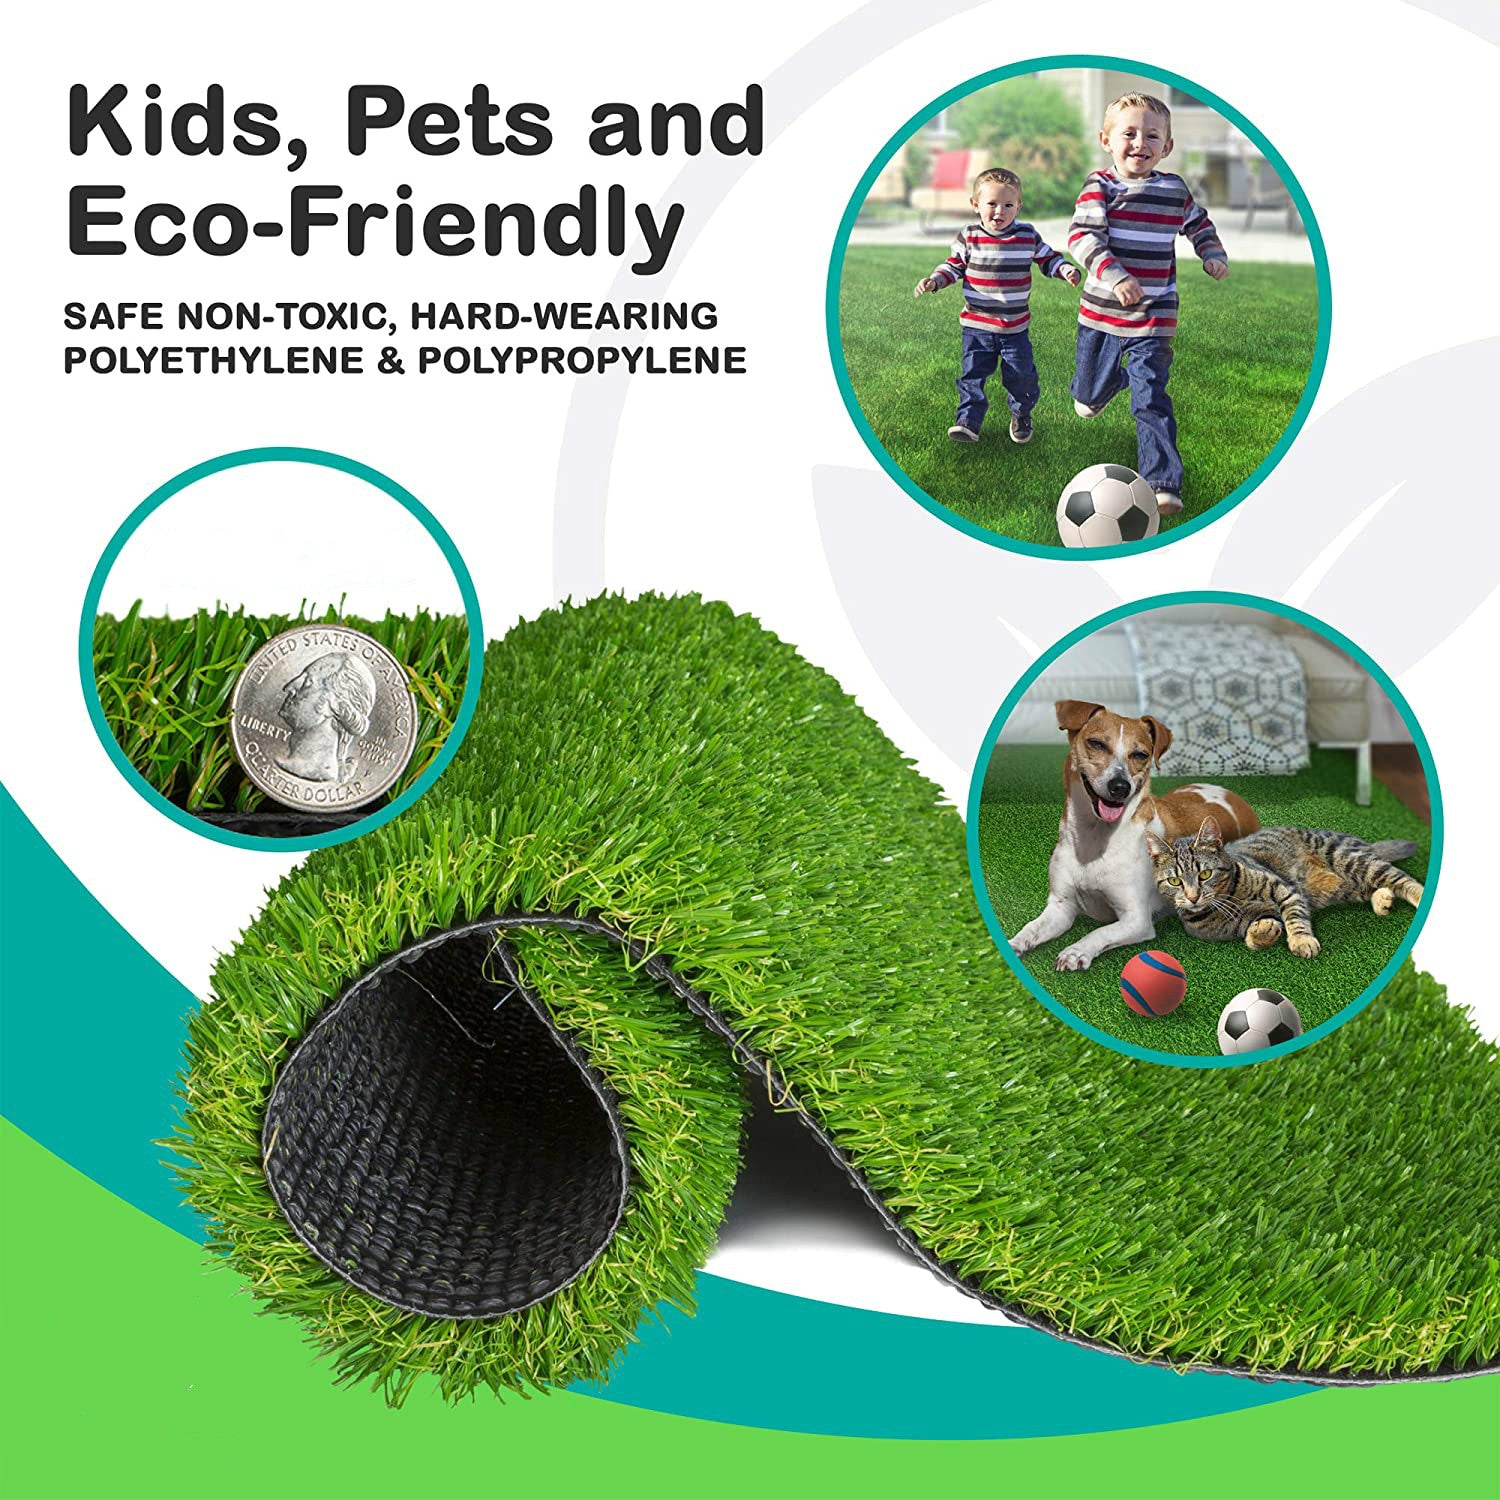 Artificial Grass for Dogs Pee Pads - Premium 4 Tone Puppy Potty Training - Buy Artificial Grass for Dogs Pee Pads - Premium 4 Tone Puppy Potty Training - hocc dubai - - baby playground outdoor- Shop baby product - Shop Pet product - shop home decor and li